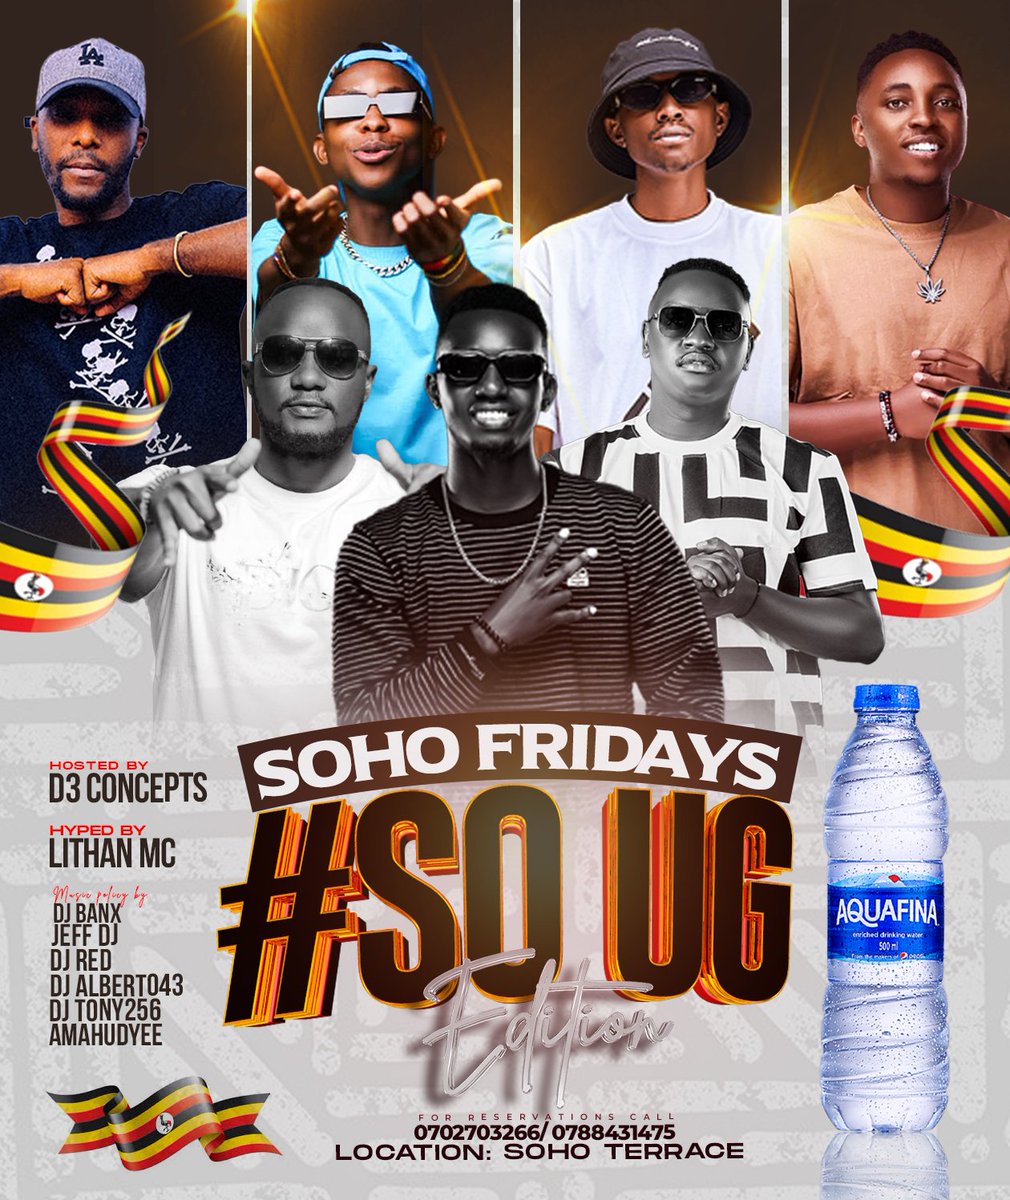 No doubt, y'all know the drill @SoHoTerraceMbra #SohoFridays #SoUg